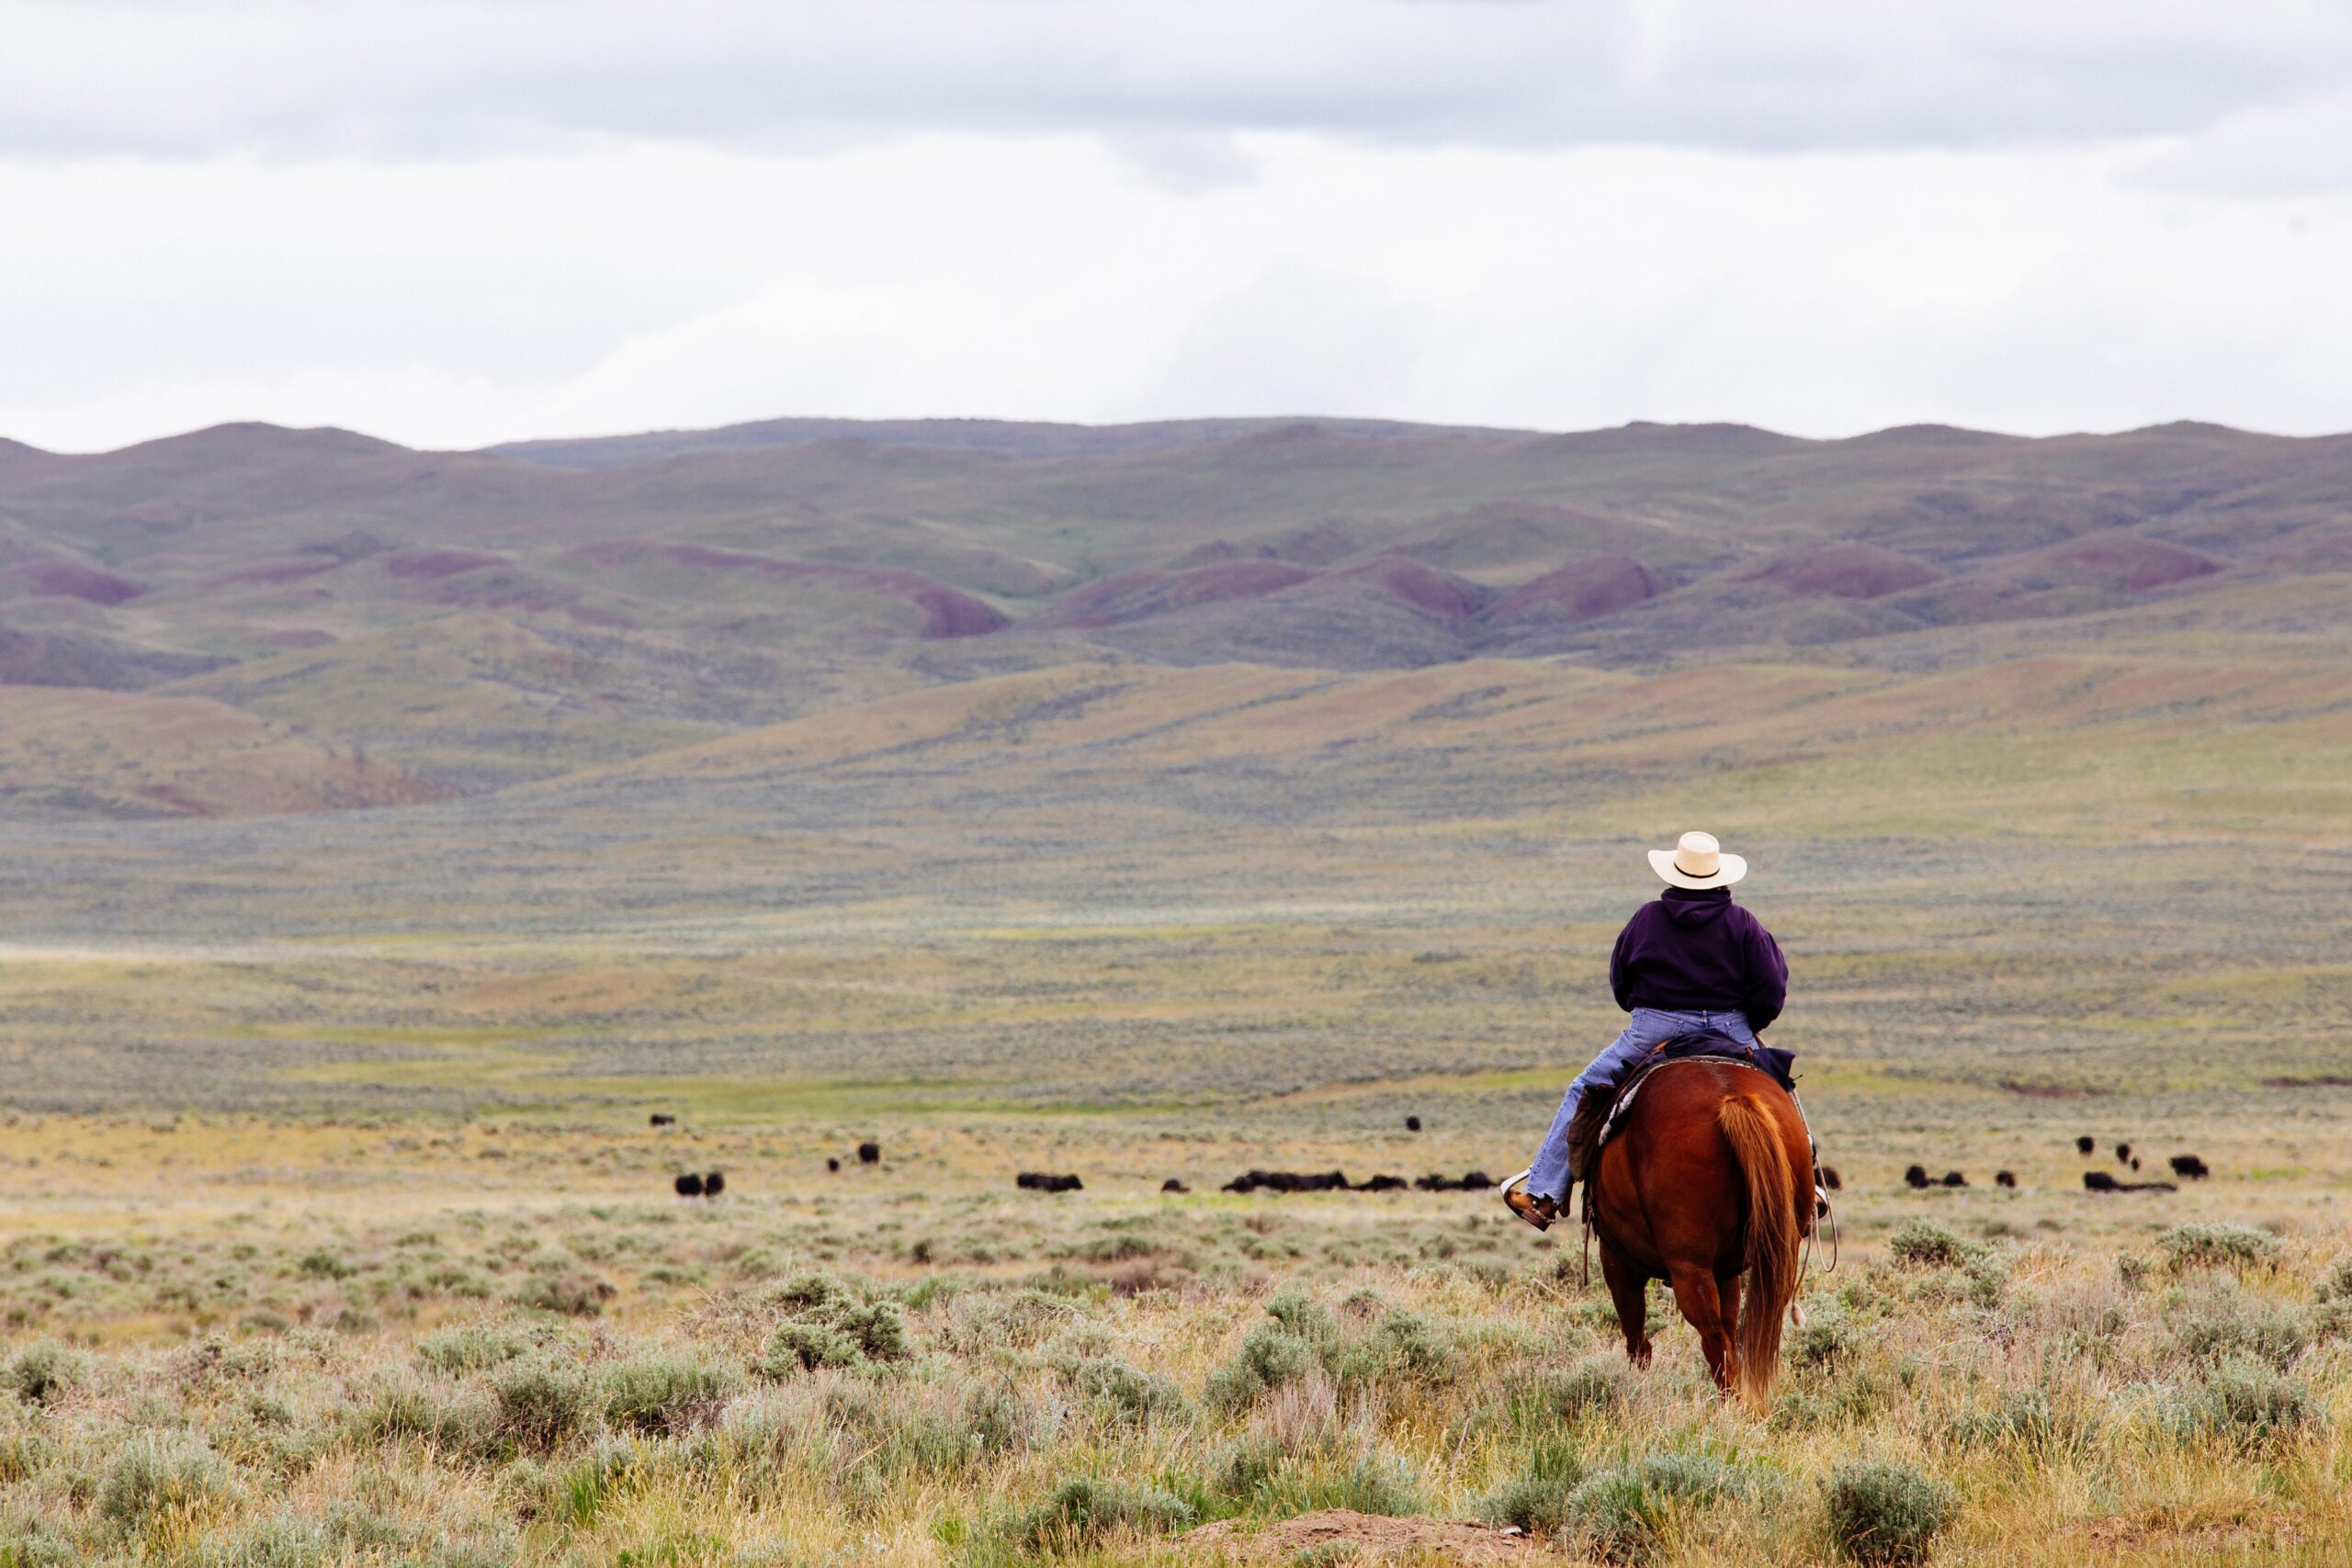 john-kakuk- Downloads 3,104 Montana, USA Published on February 23, 2019 Canon, EOS 6D Free to use under the Unsplash License A rancher rides out to collect some cows in rural Montana.-unsplash